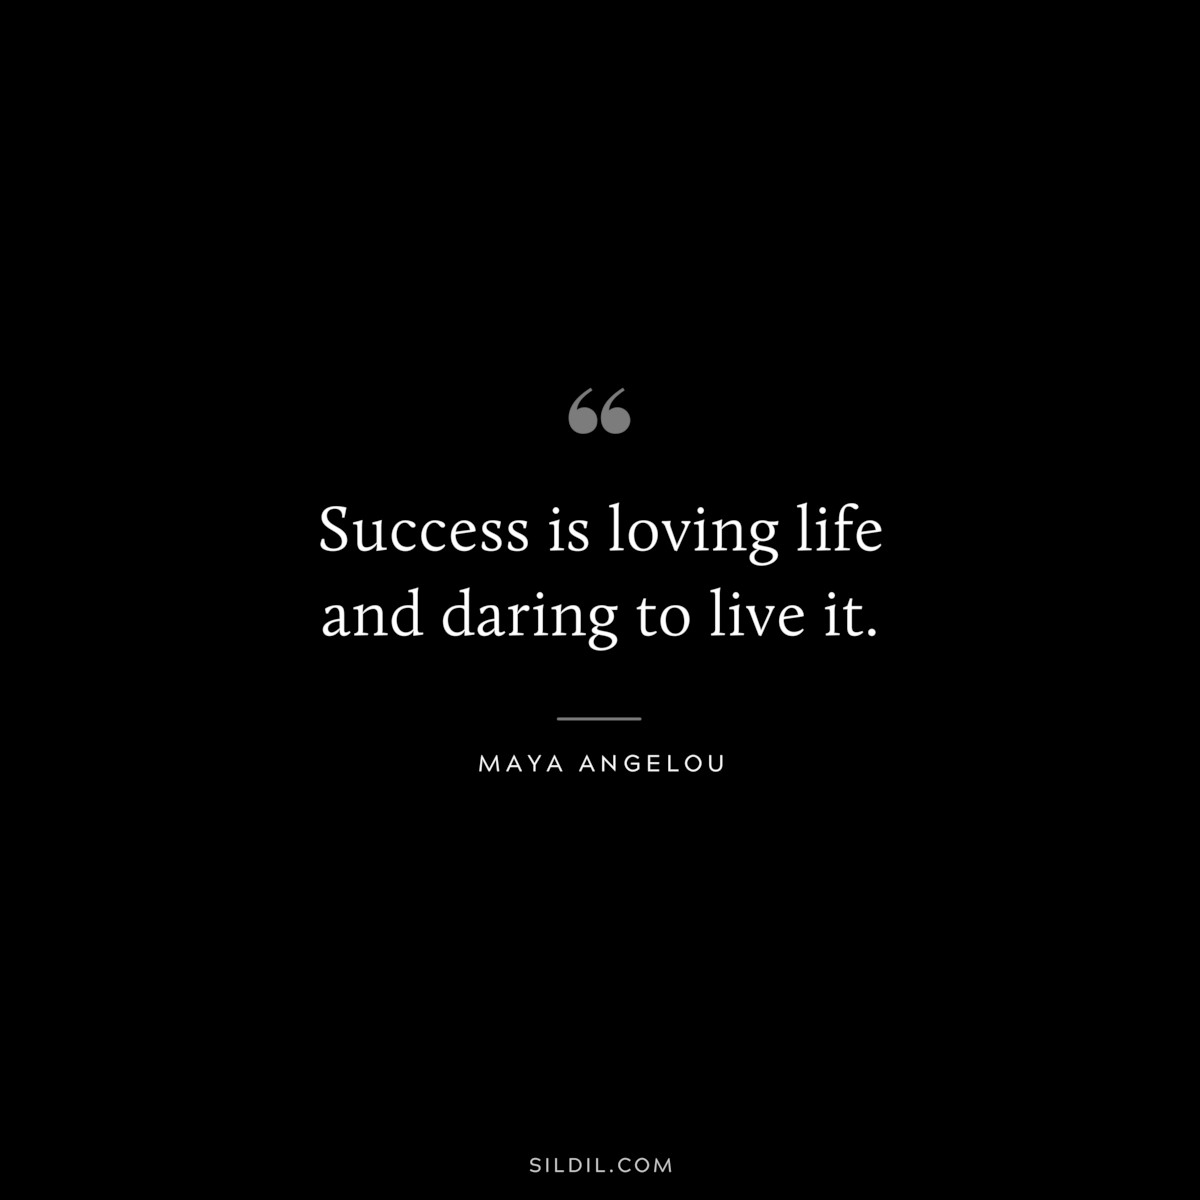 Success is loving life and daring to live it. ― Maya Angelou